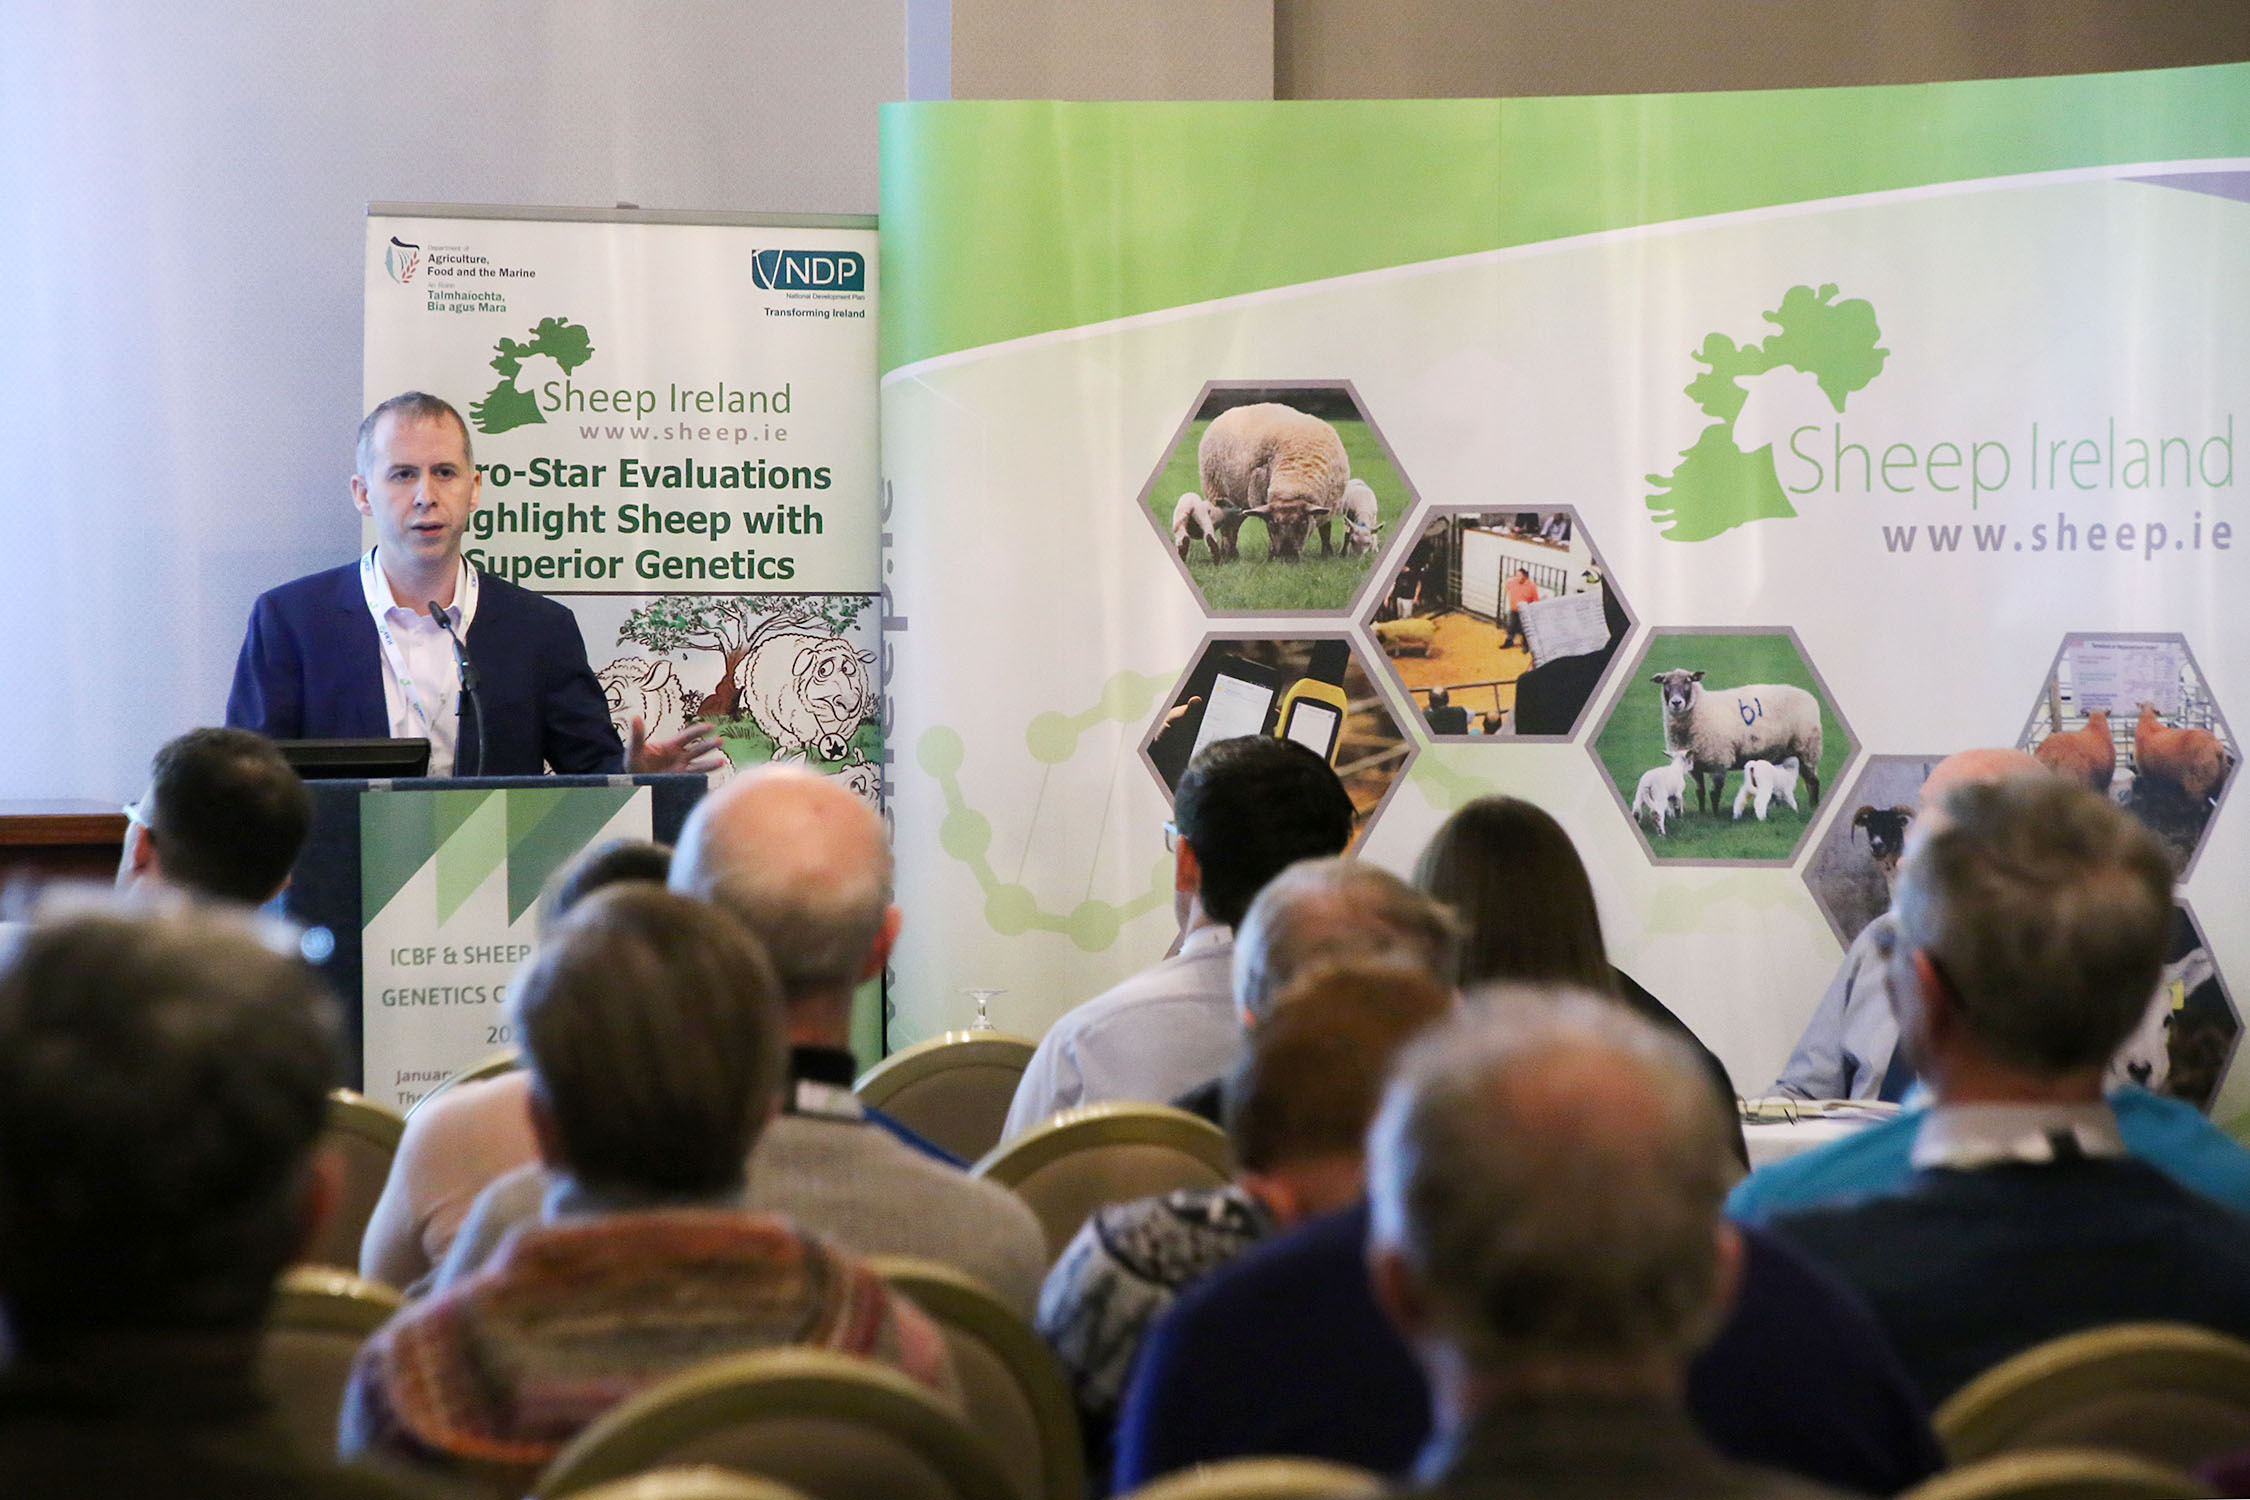 You are currently viewing “How can twins have completely different genetics?” Dr. Donagh Berry, Teagasc